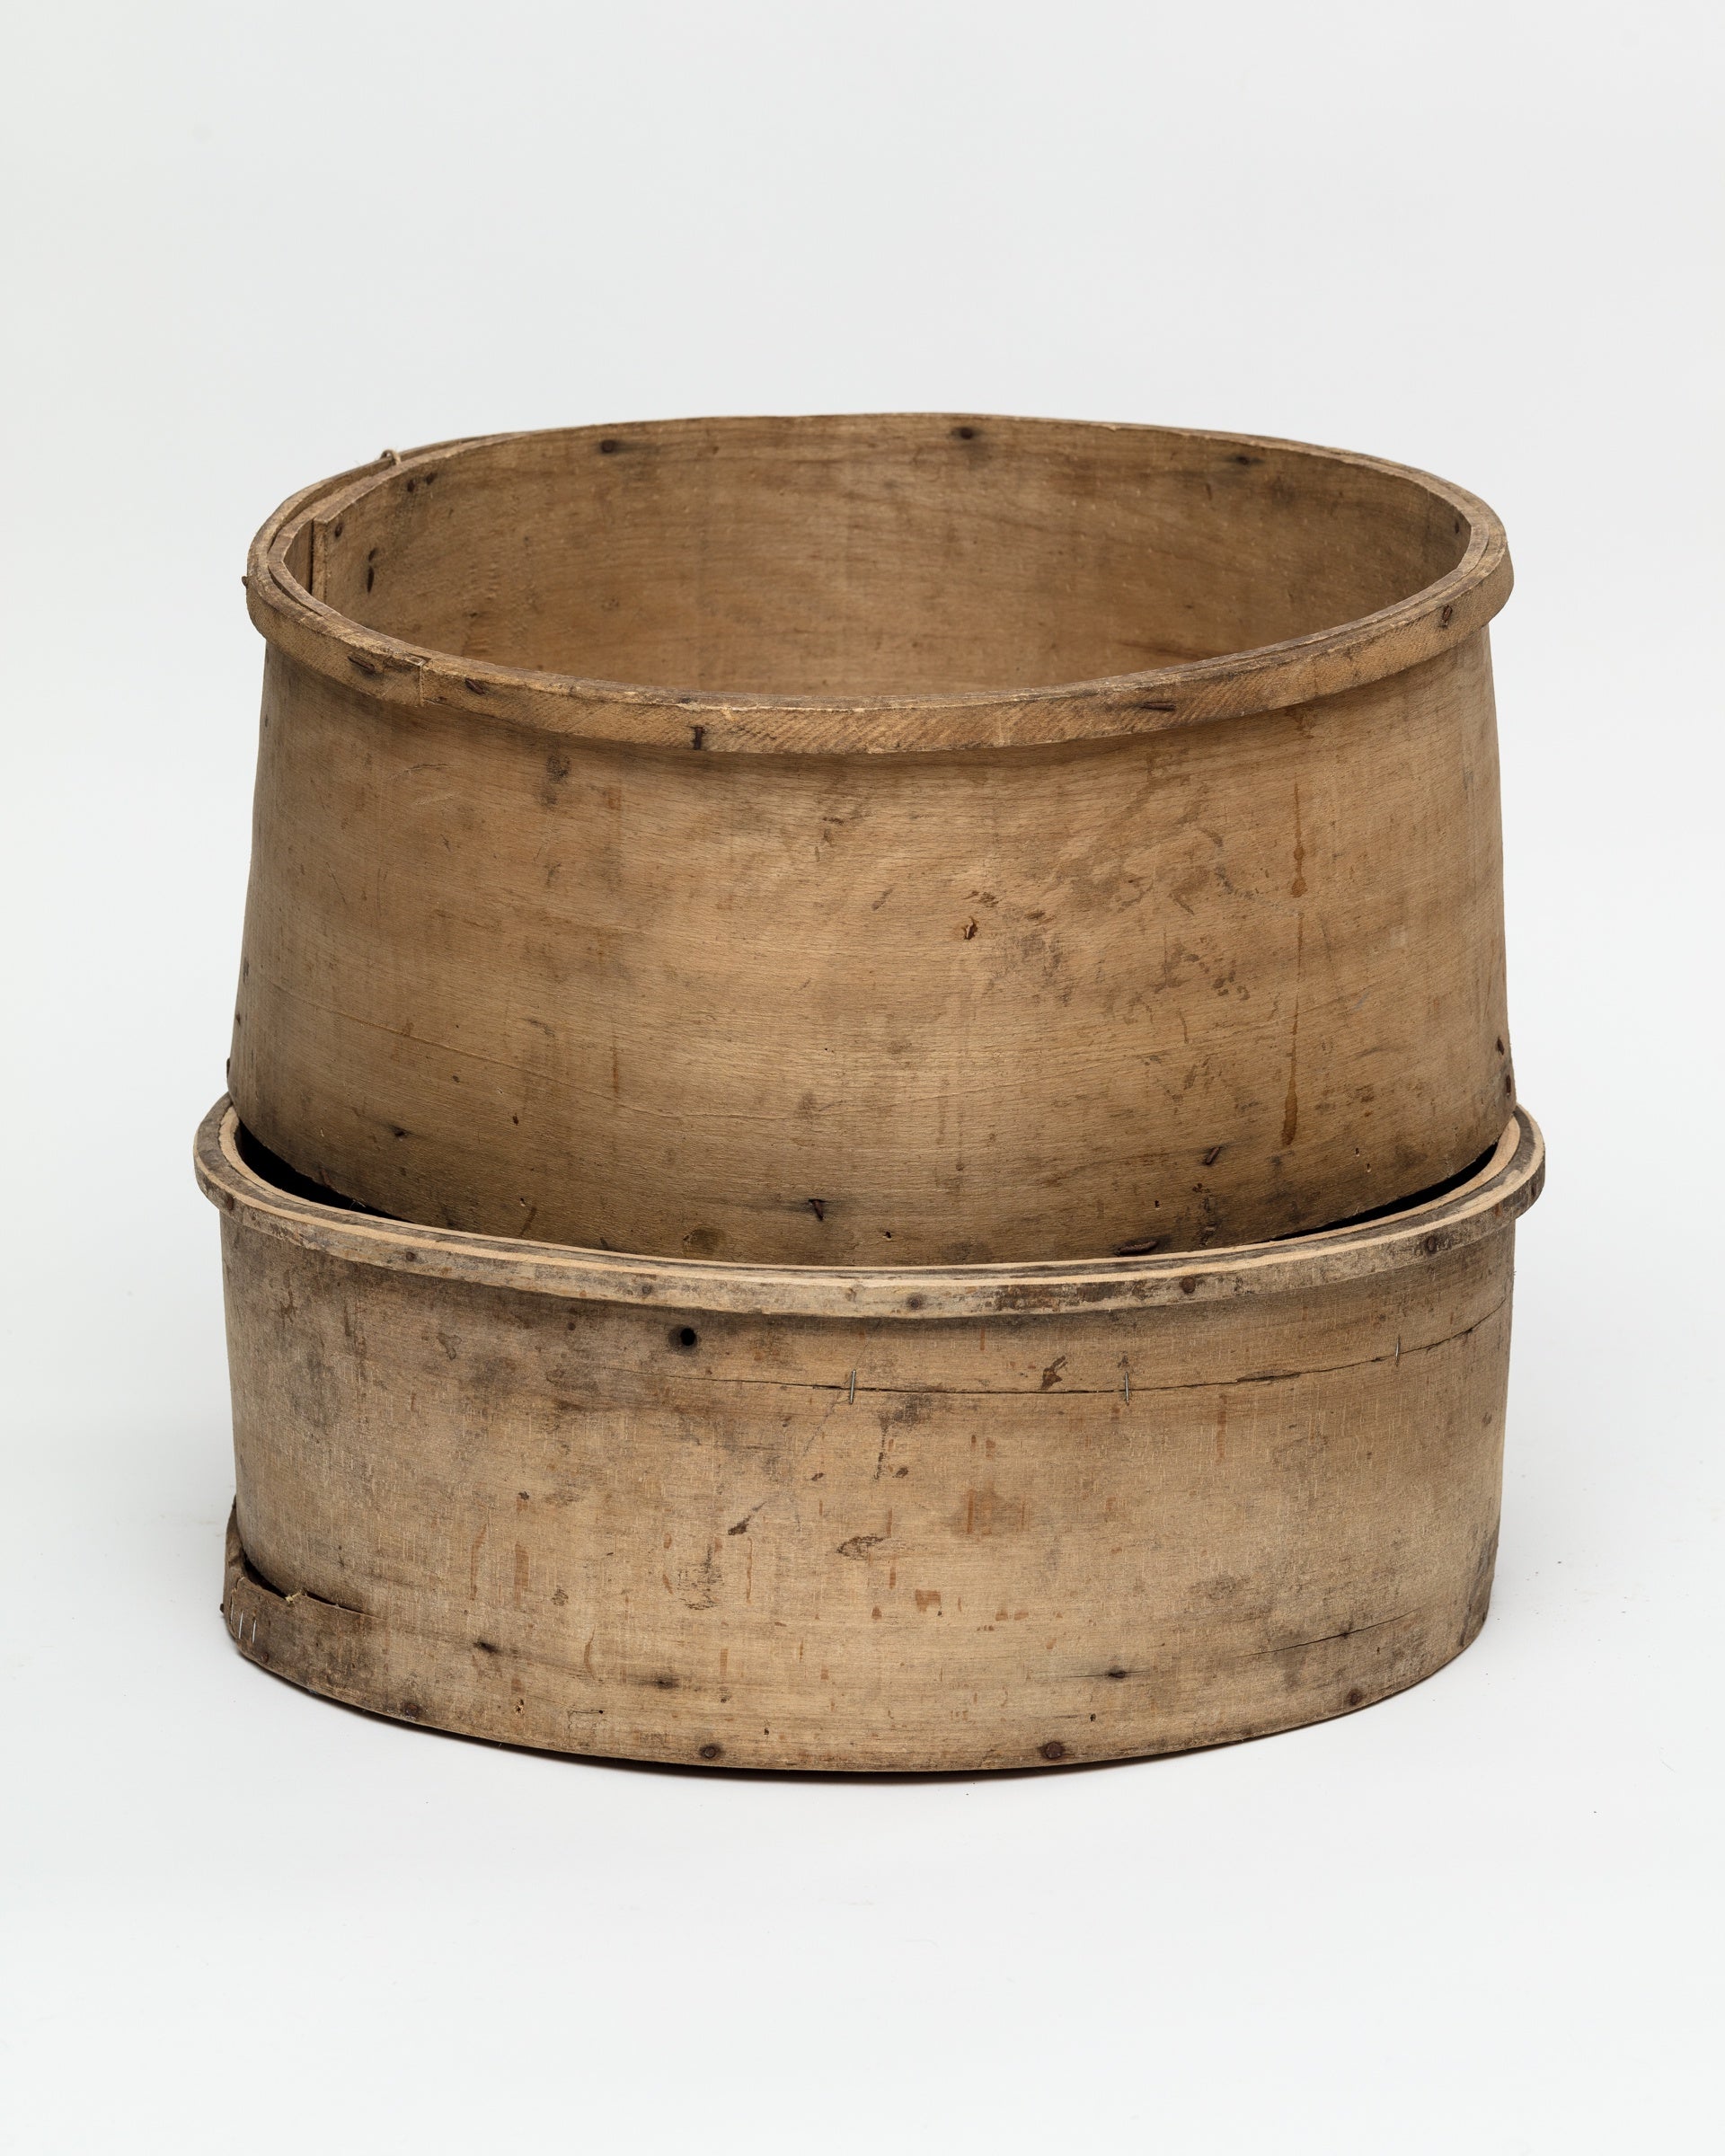 Two aged, circular wooden sieves stacked together against a plain white background, often found in a Scottsdale Arizona bungalow, showcasing faded patina and visible signs of wear and tear. This is the CHEESE MOLD BUCKET 35 from Indus Design Imports.